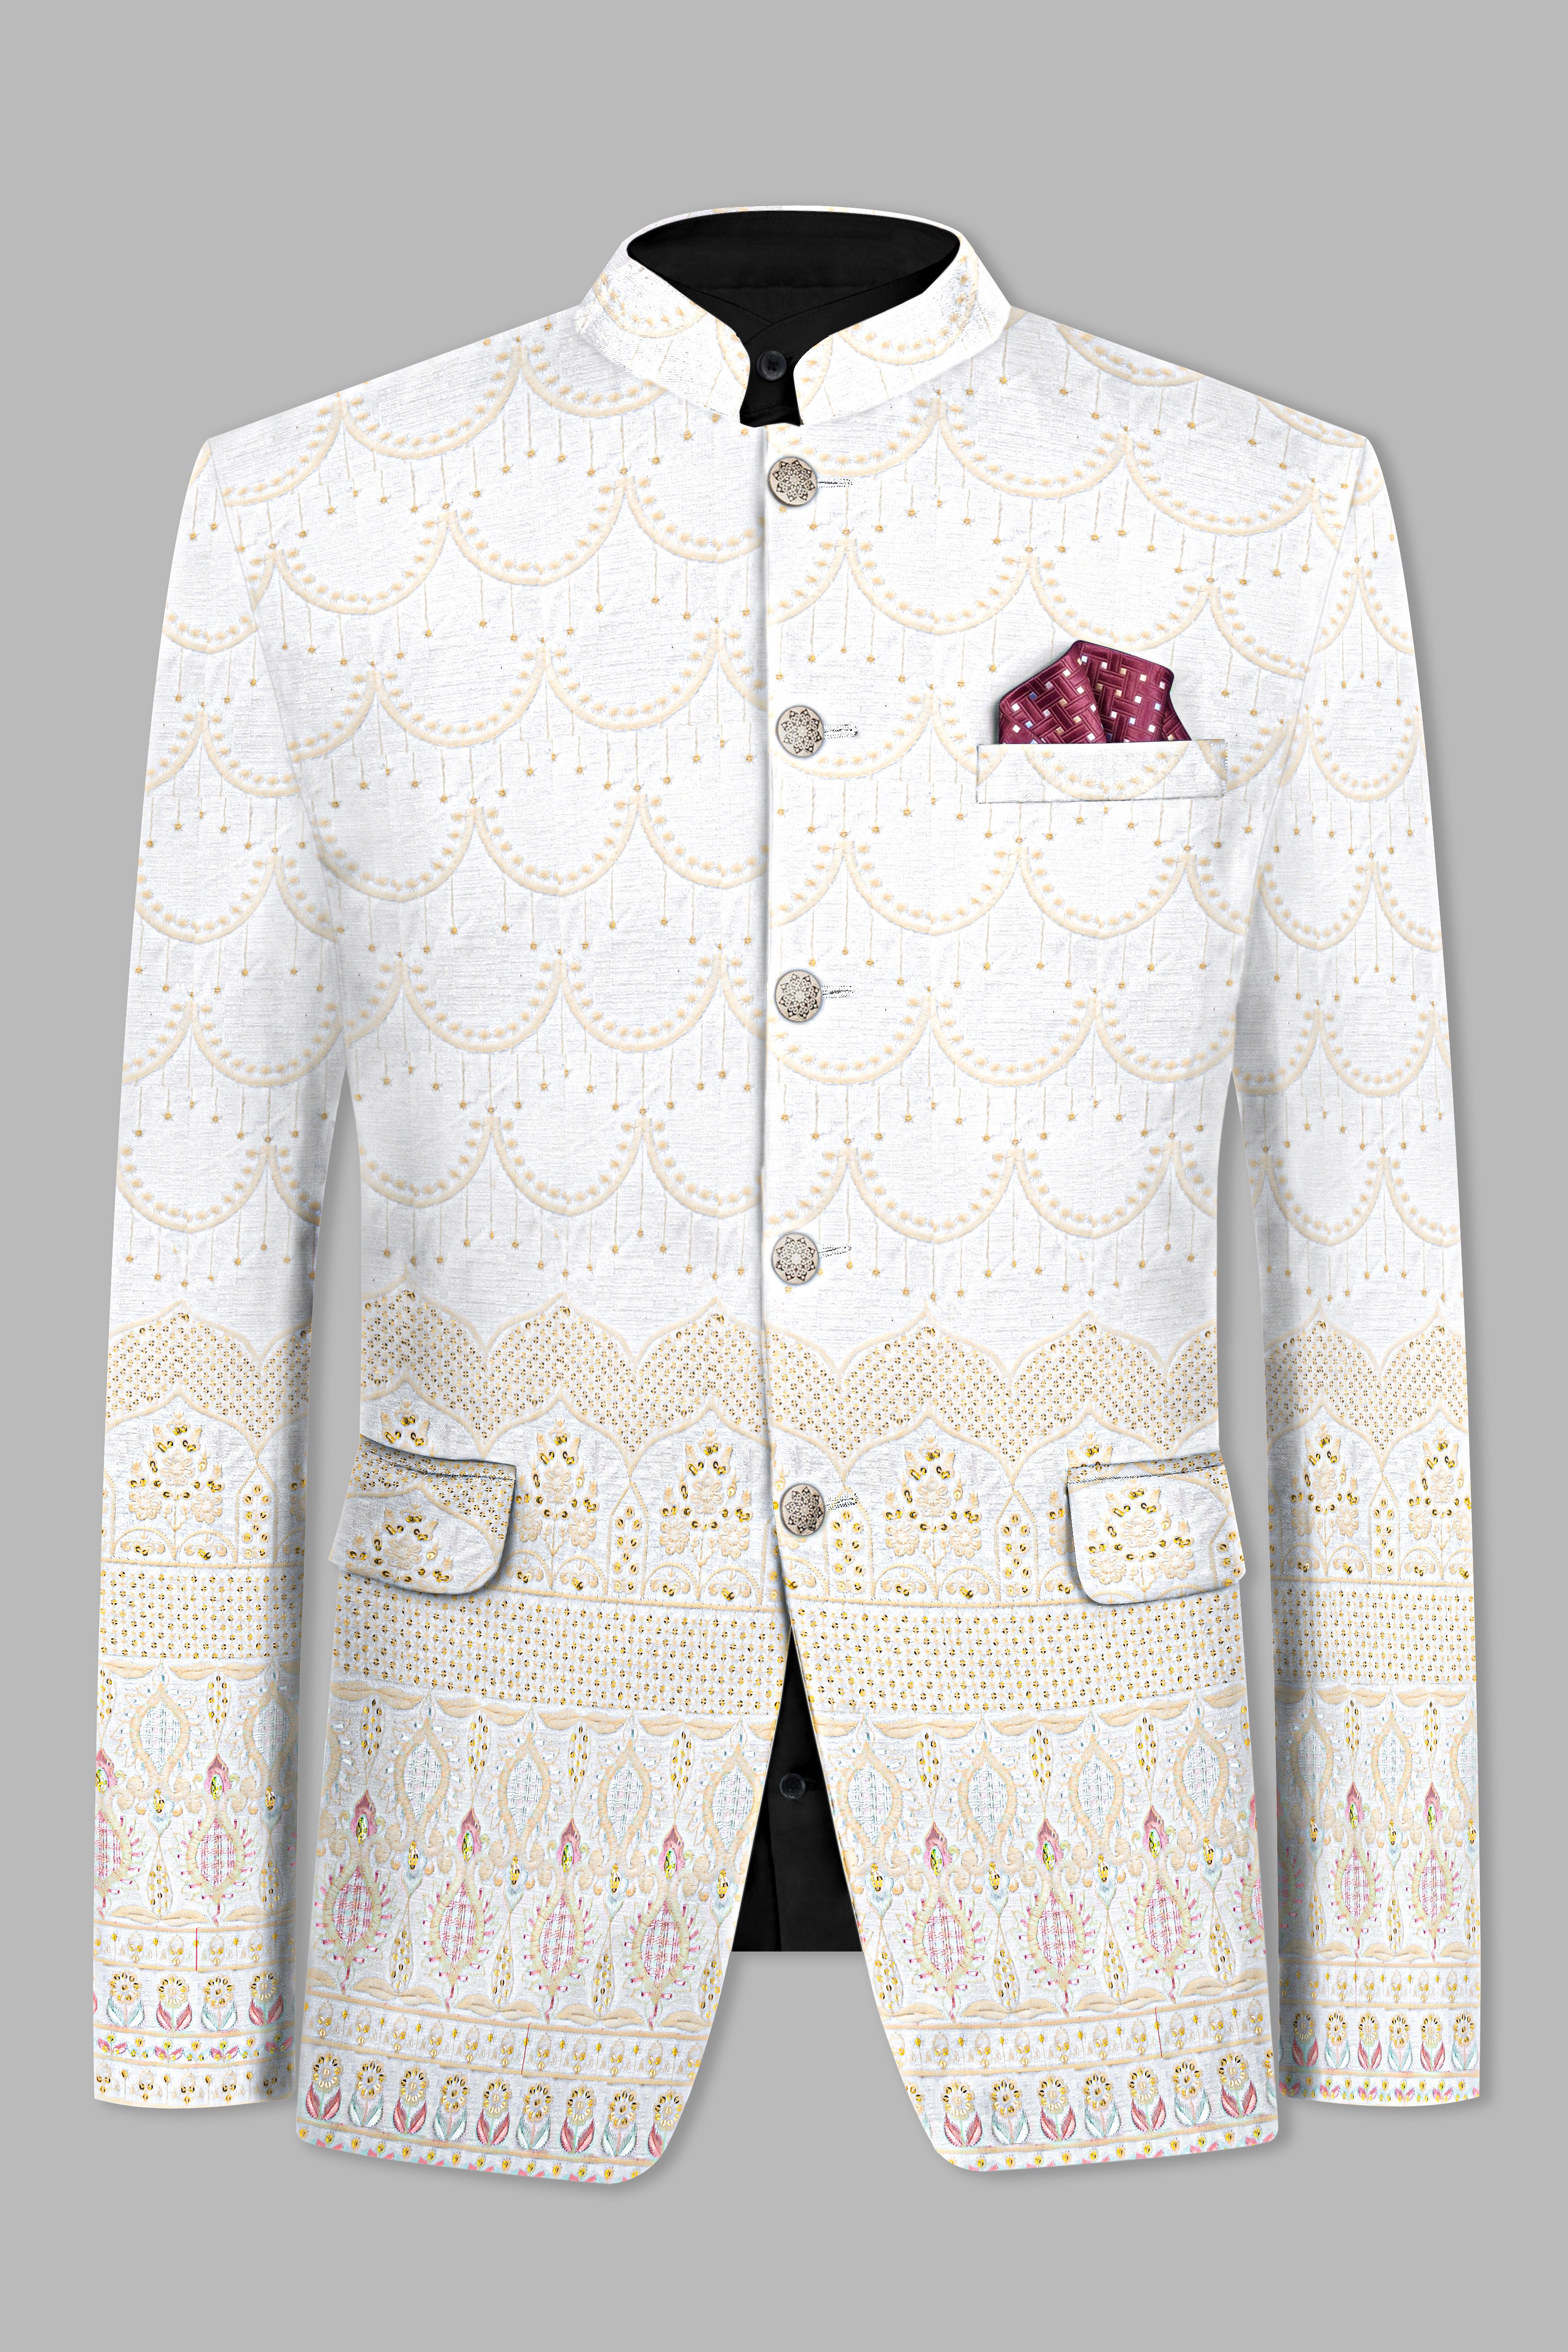 Sand Cream Sequin and Thread Embroidered Bandhgala Jodhpuri BL3539-BG-36, BL3539-BG-38, BL3539-BG-40, BL3539-BG-42, BL3539-BG-44, BL3539-BG-46, BL3539-BG-48, BL3539-BG-50, BL3539-BG-52, BL3539-BG-54, BL3539-BG-56, BL3539-BG-58, BL3539-BG-60